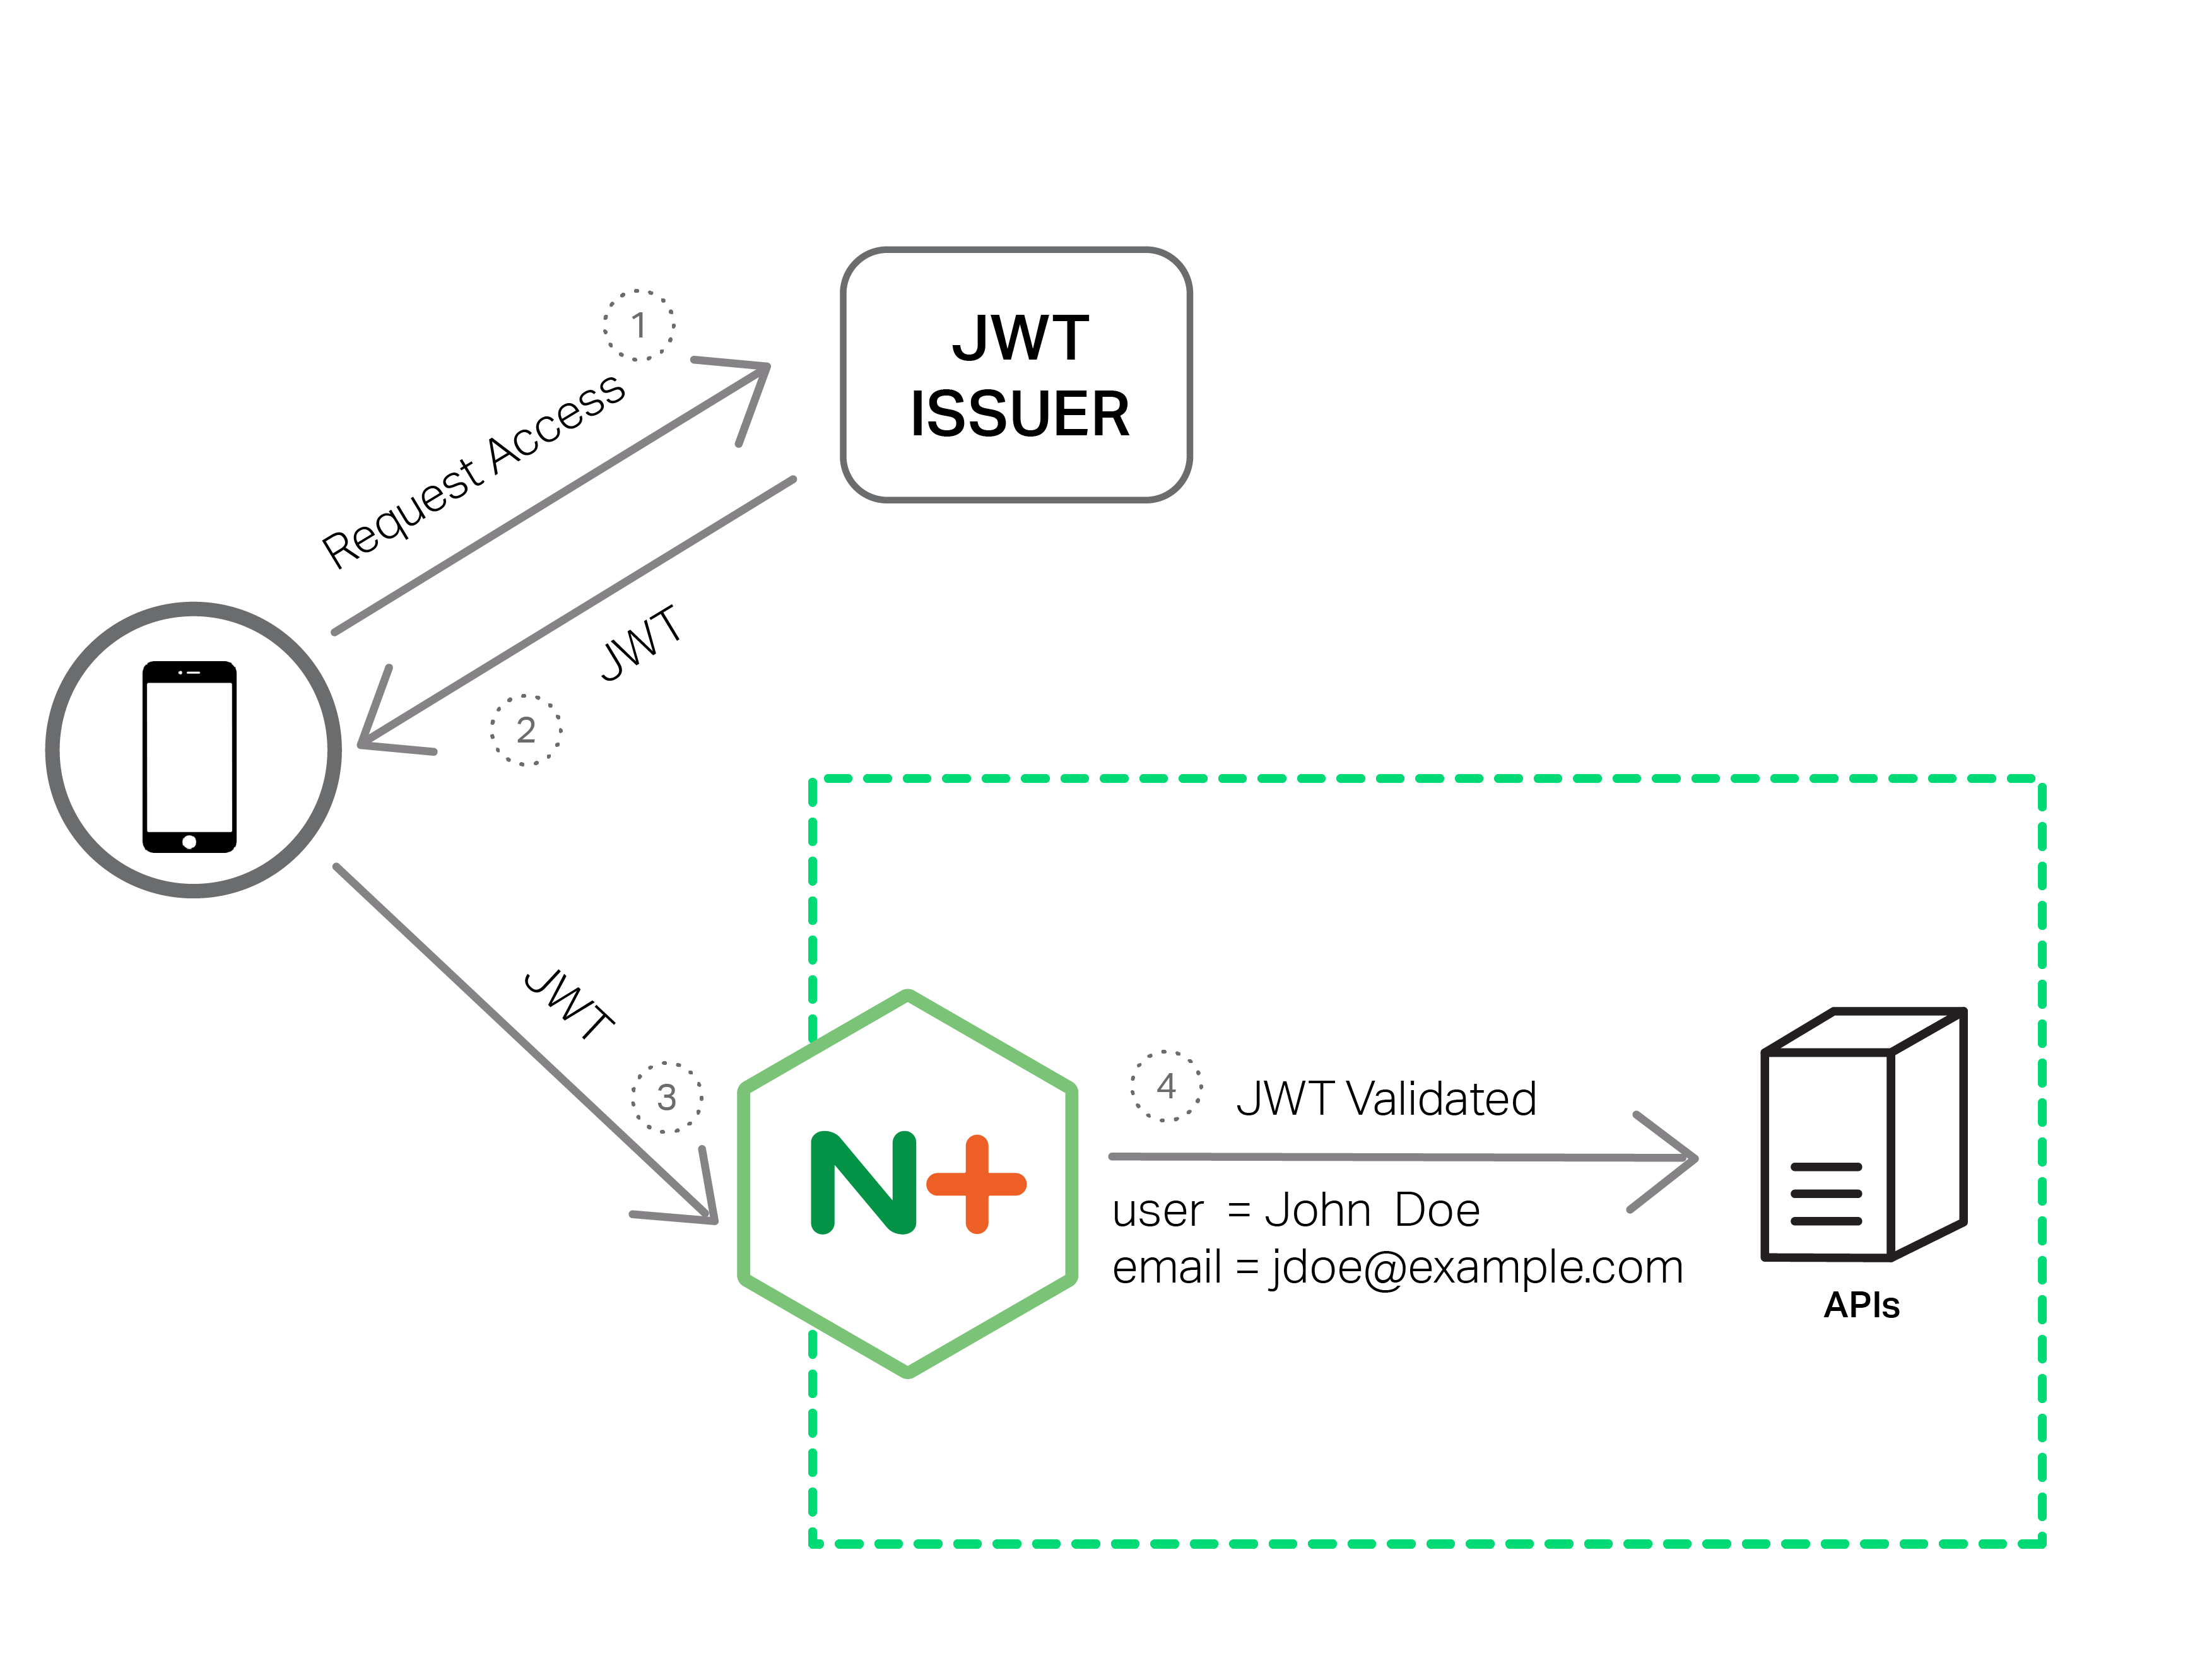 To provide authentication services for APIs, NGINX Plus validates JSON Web Tokens (JWTs)